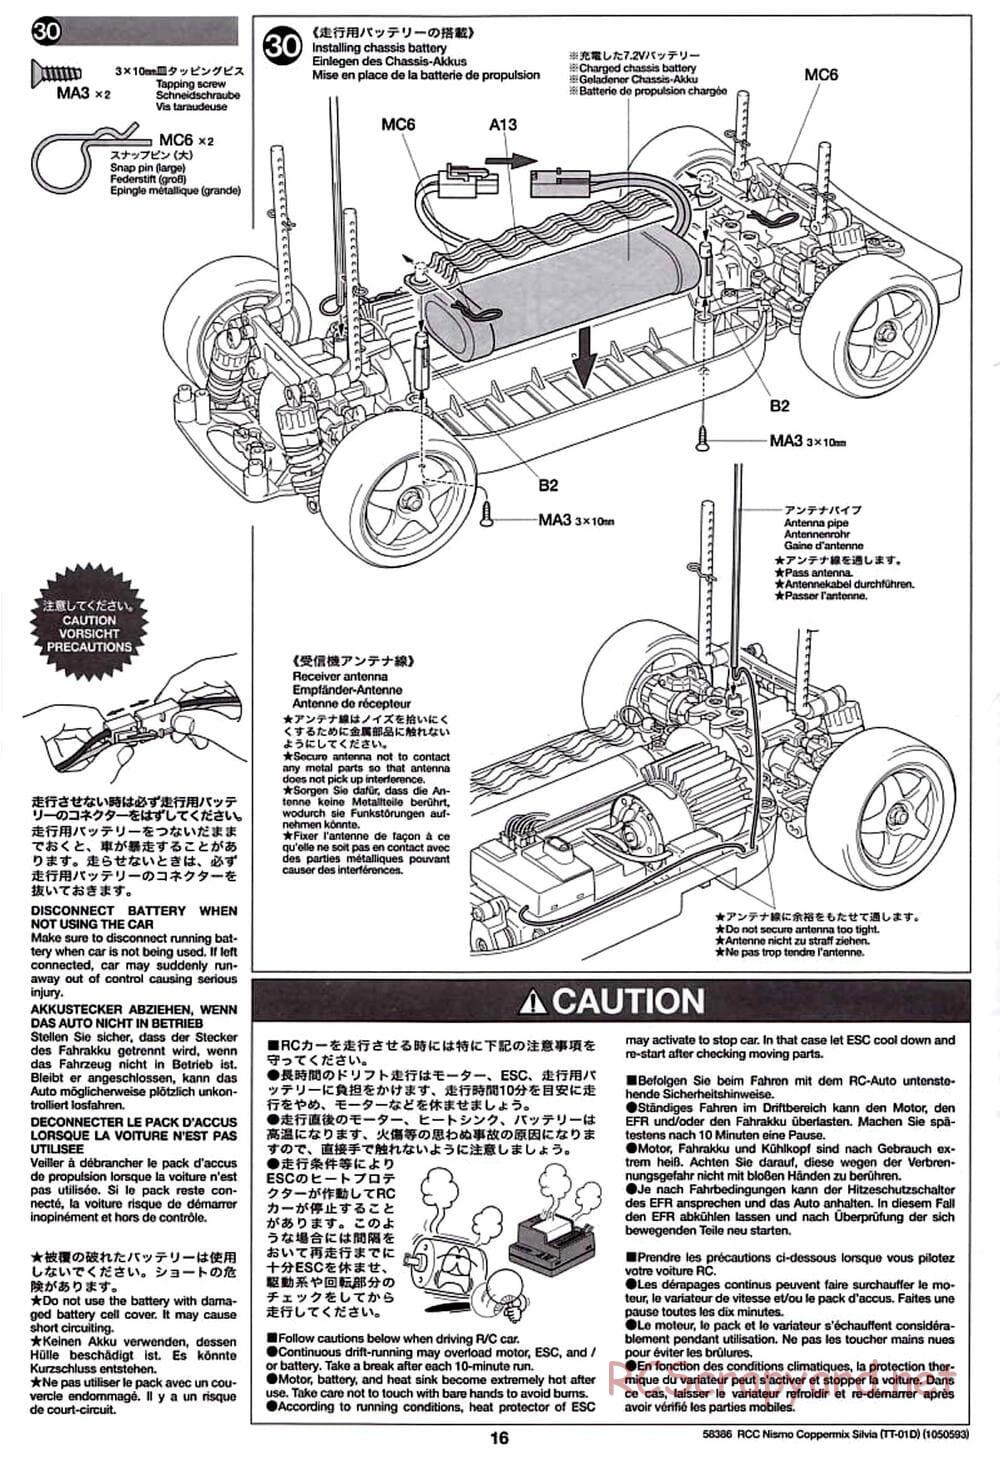 Tamiya - Nismo Coppermix Silvia Drift Spec - TT-01D Chassis - Manual - Page 16